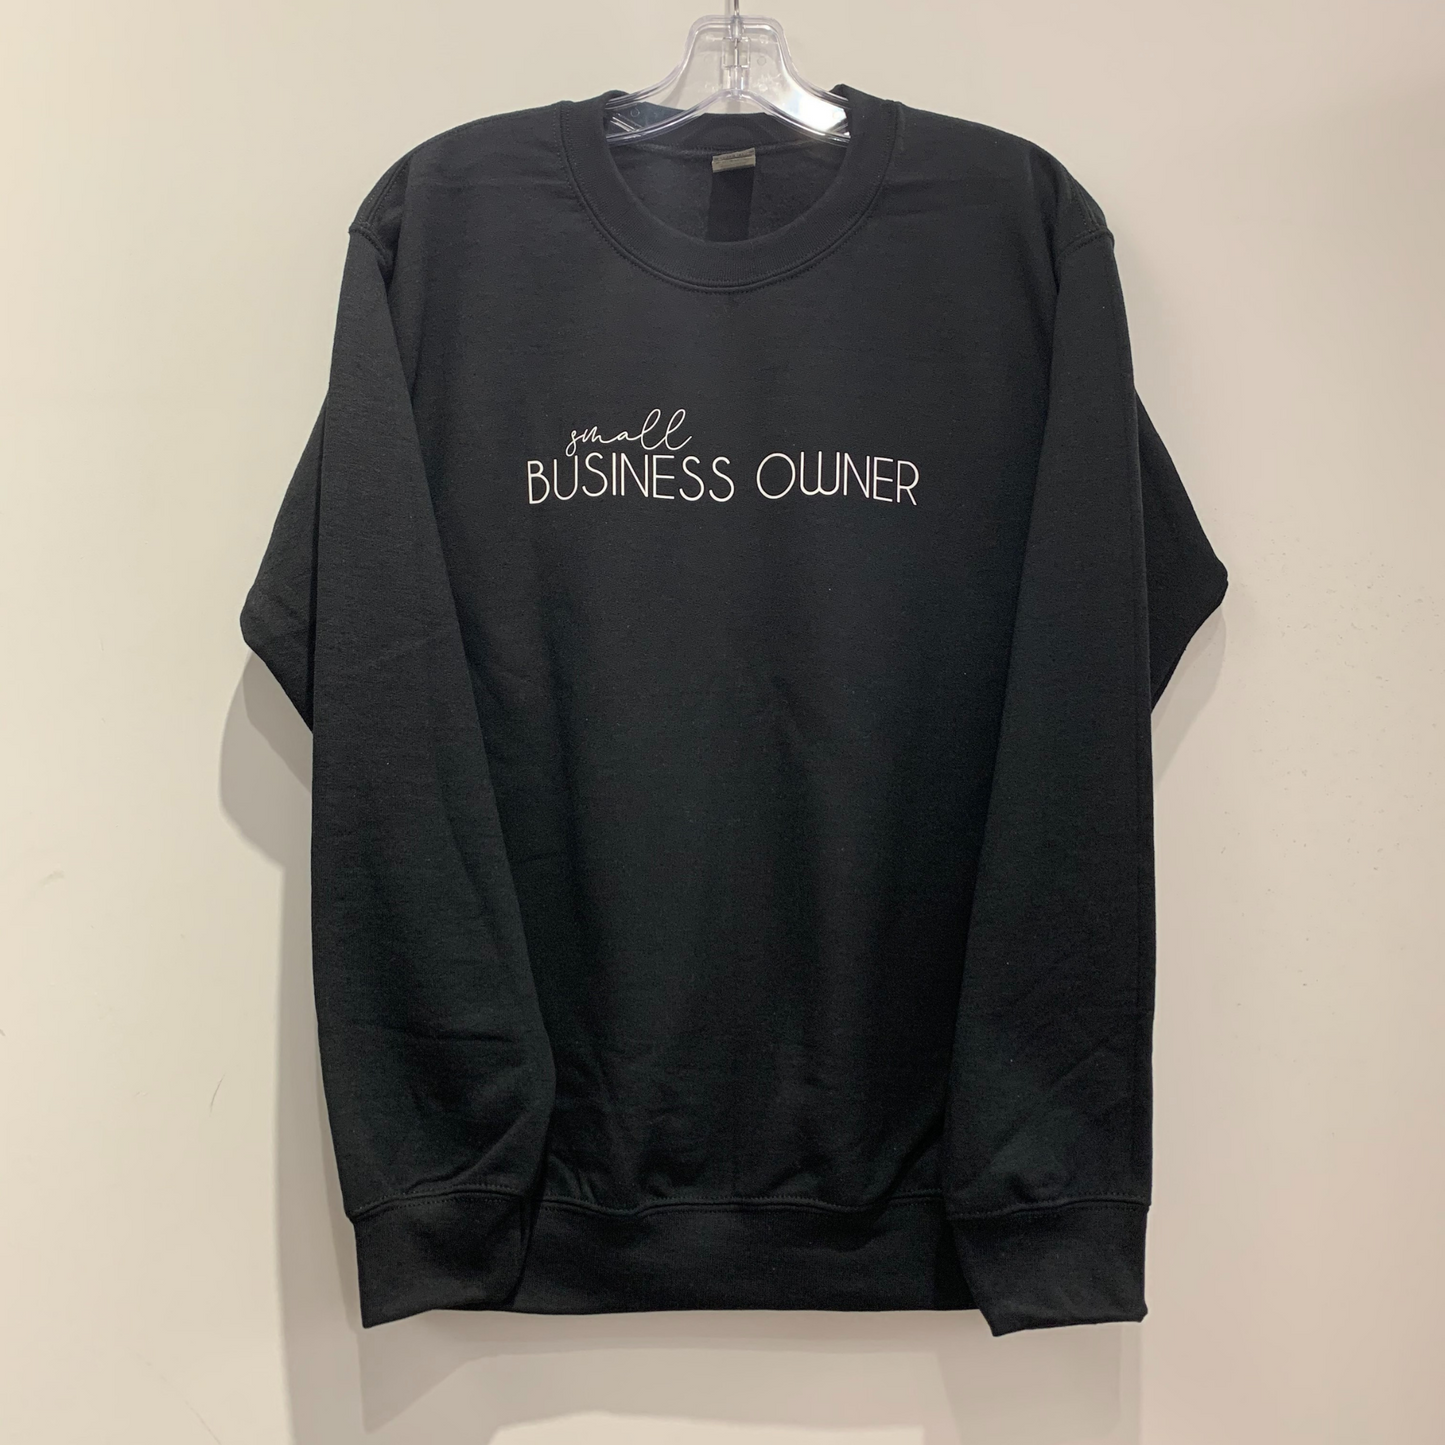 Small Business Owner - Black Crewneck